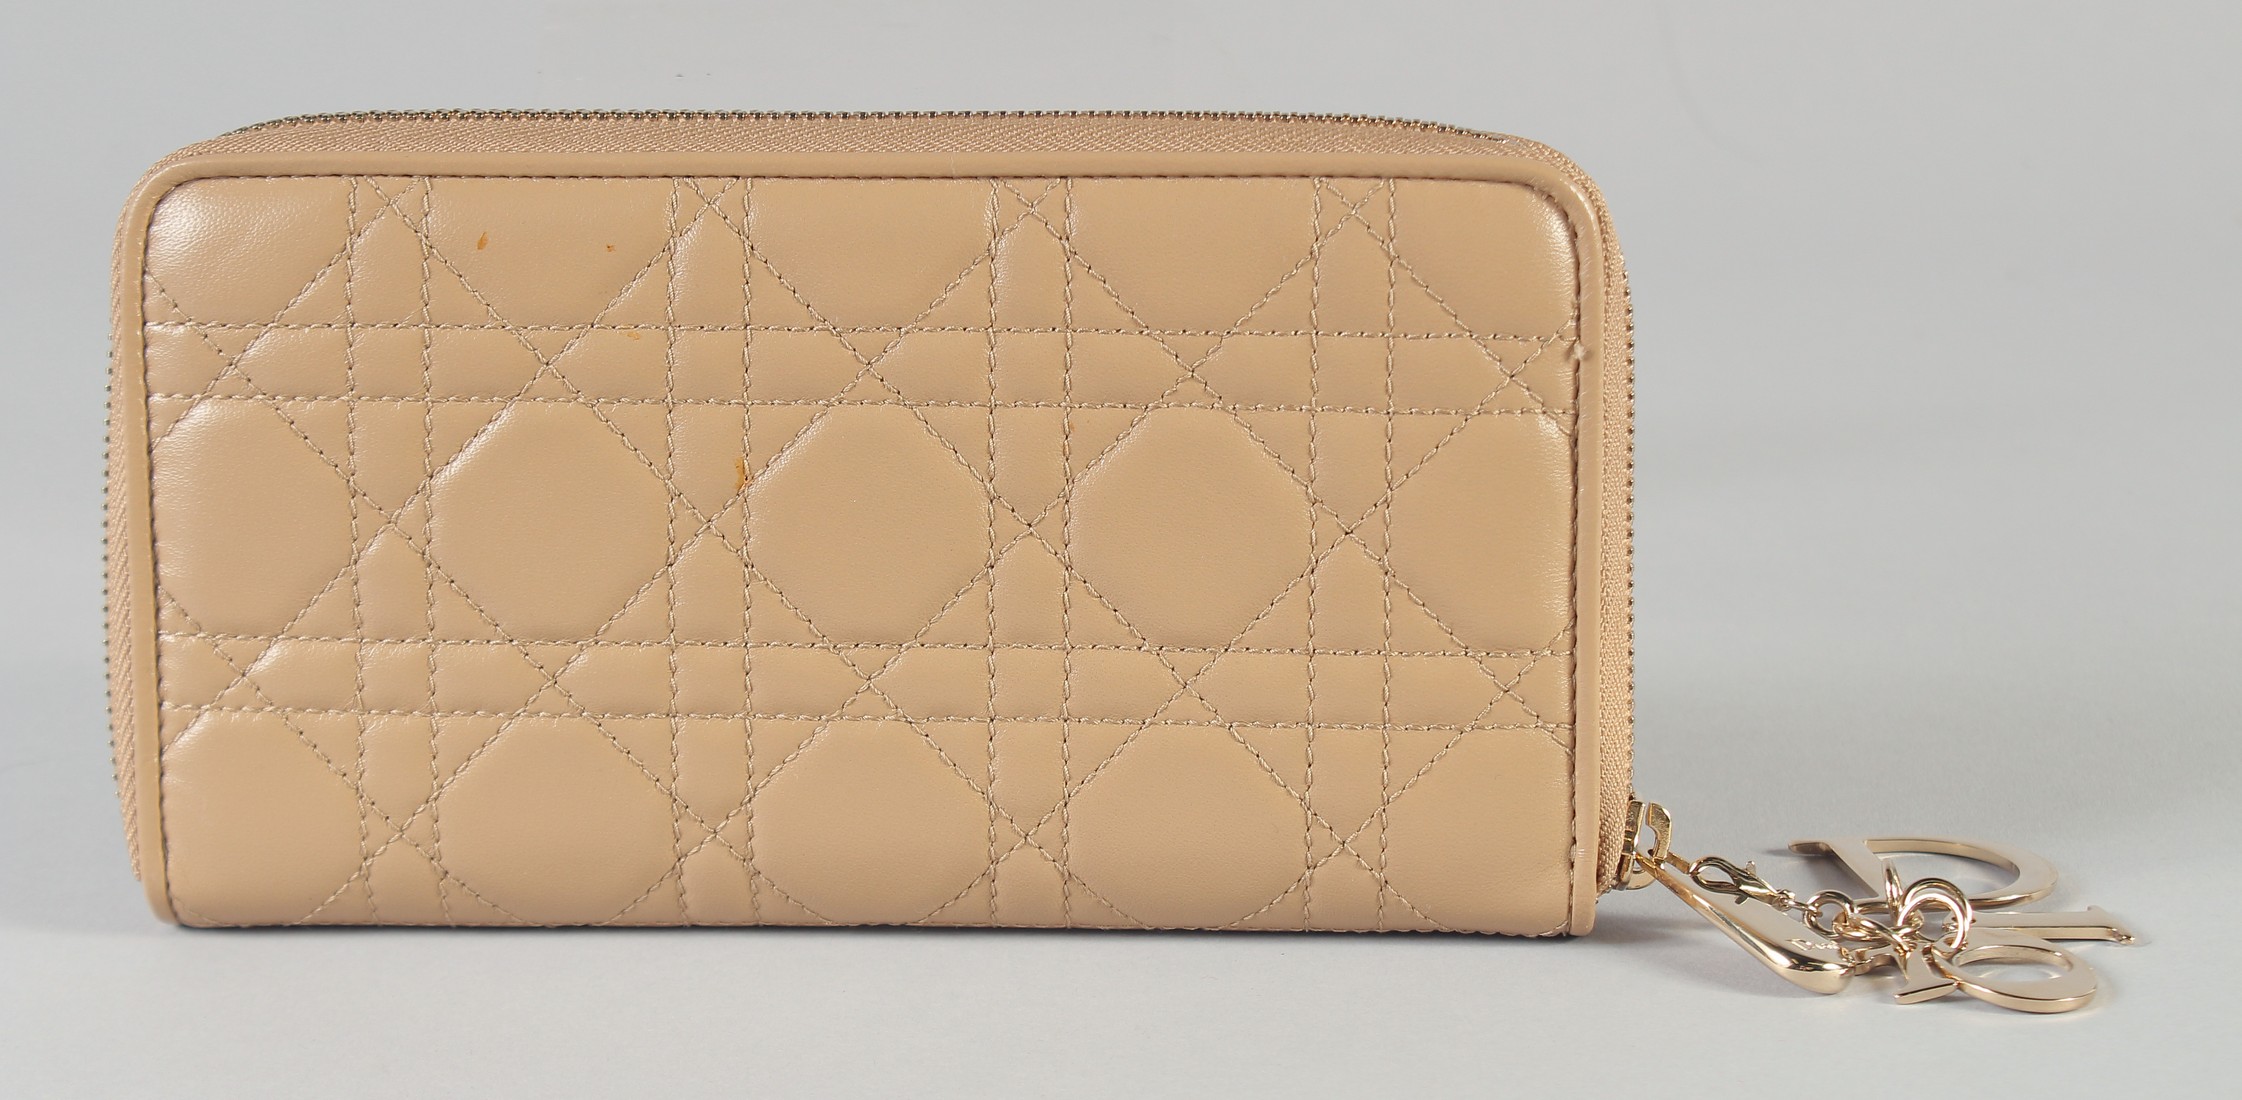 A CHRISTIAN DIOR PADDED PURSE. 20cm long, 11cm high, with a Dior gilt tag, in a dust cover.